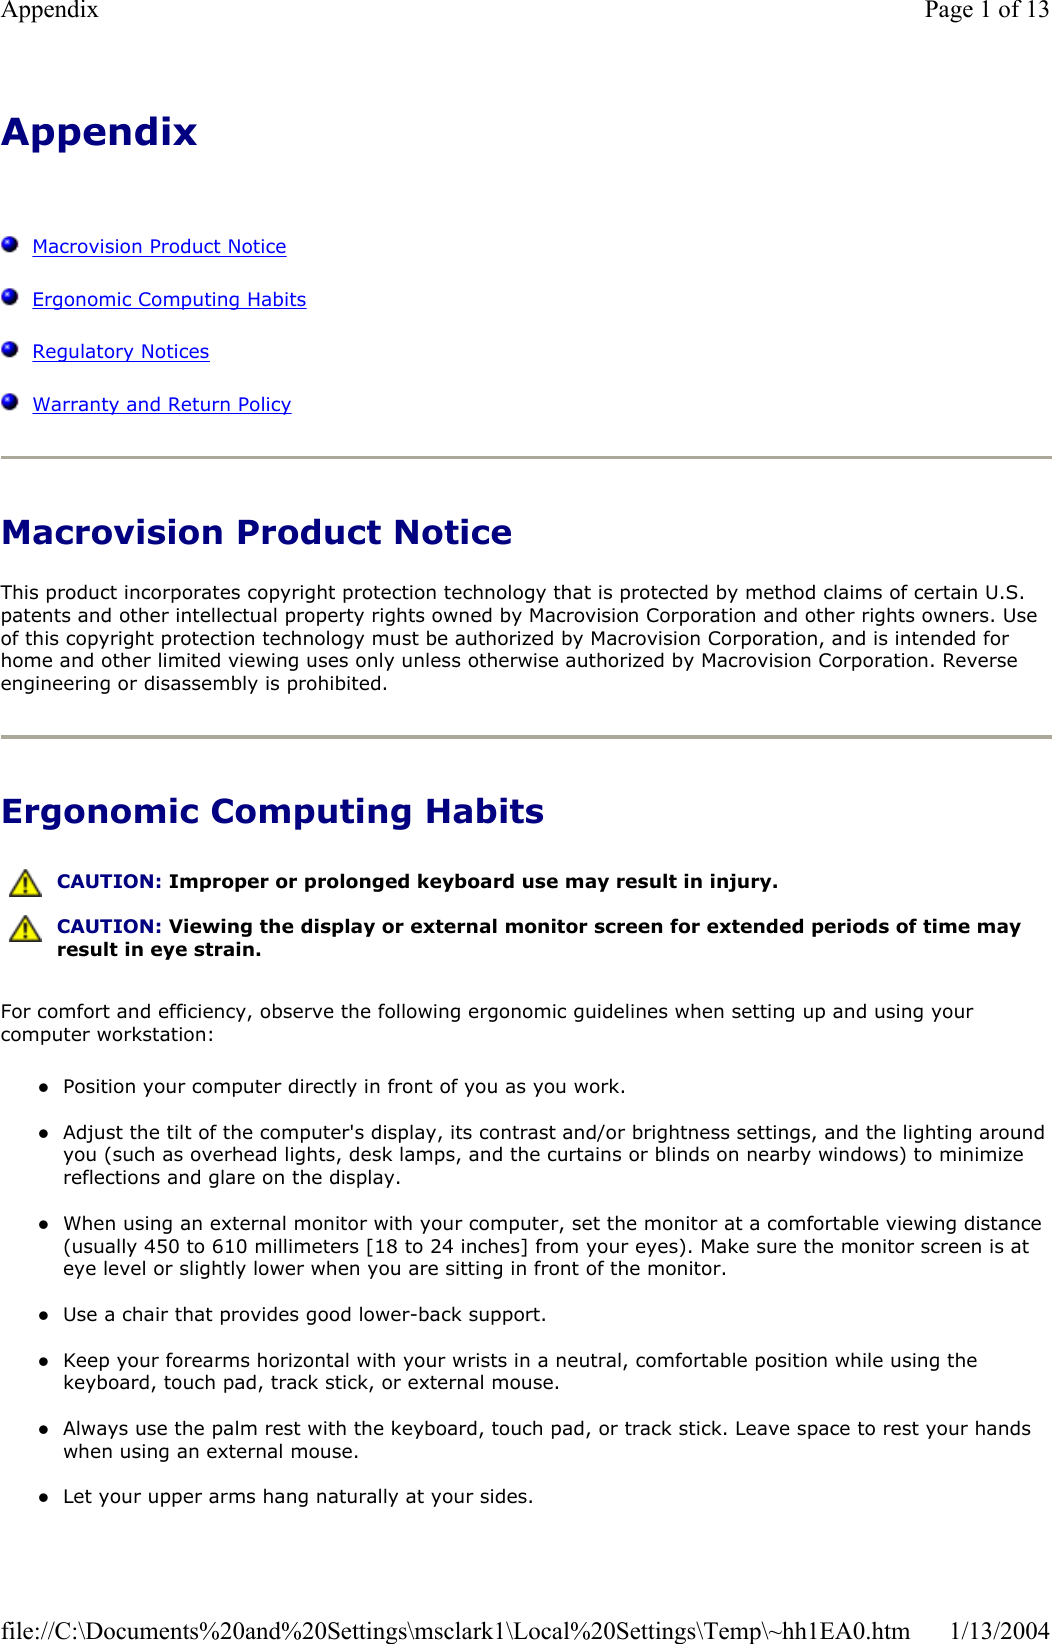 AppendixMacrovision Product NoticeErgonomic Computing HabitsRegulatory NoticesWarranty and Return PolicyMacrovision Product Notice This product incorporates copyright protection technology that is protected by method claims of certain U.S. patents and other intellectual property rights owned by Macrovision Corporation and other rights owners. Use of this copyright protection technology must be authorized by Macrovision Corporation, and is intended for home and other limited viewing uses only unless otherwise authorized by Macrovision Corporation. Reverse engineering or disassembly is prohibited. Ergonomic Computing Habits For comfort and efficiency, observe the following ergonomic guidelines when setting up and using your computer workstation: zPosition your computer directly in front of you as you work. zAdjust the tilt of the computer&apos;s display, its contrast and/or brightness settings, and the lighting around you (such as overhead lights, desk lamps, and the curtains or blinds on nearby windows) to minimize reflections and glare on the display. zWhen using an external monitor with your computer, set the monitor at a comfortable viewing distance (usually 450 to 610 millimeters [18 to 24 inches] from your eyes). Make sure the monitor screen is at eye level or slightly lower when you are sitting in front of the monitor.  zUse a chair that provides good lower-back support. zKeep your forearms horizontal with your wrists in a neutral, comfortable position while using the keyboard, touch pad, track stick, or external mouse. zAlways use the palm rest with the keyboard, touch pad, or track stick. Leave space to rest your hands when using an external mouse. zLet your upper arms hang naturally at your sides. CAUTION: Improper or prolonged keyboard use may result in injury. CAUTION: Viewing the display or external monitor screen for extended periods of time may result in eye strain. Page 1 of 13Appendix1/13/2004file://C:\Documents%20and%20Settings\msclark1\Local%20Settings\Temp\~hh1EA0.htm